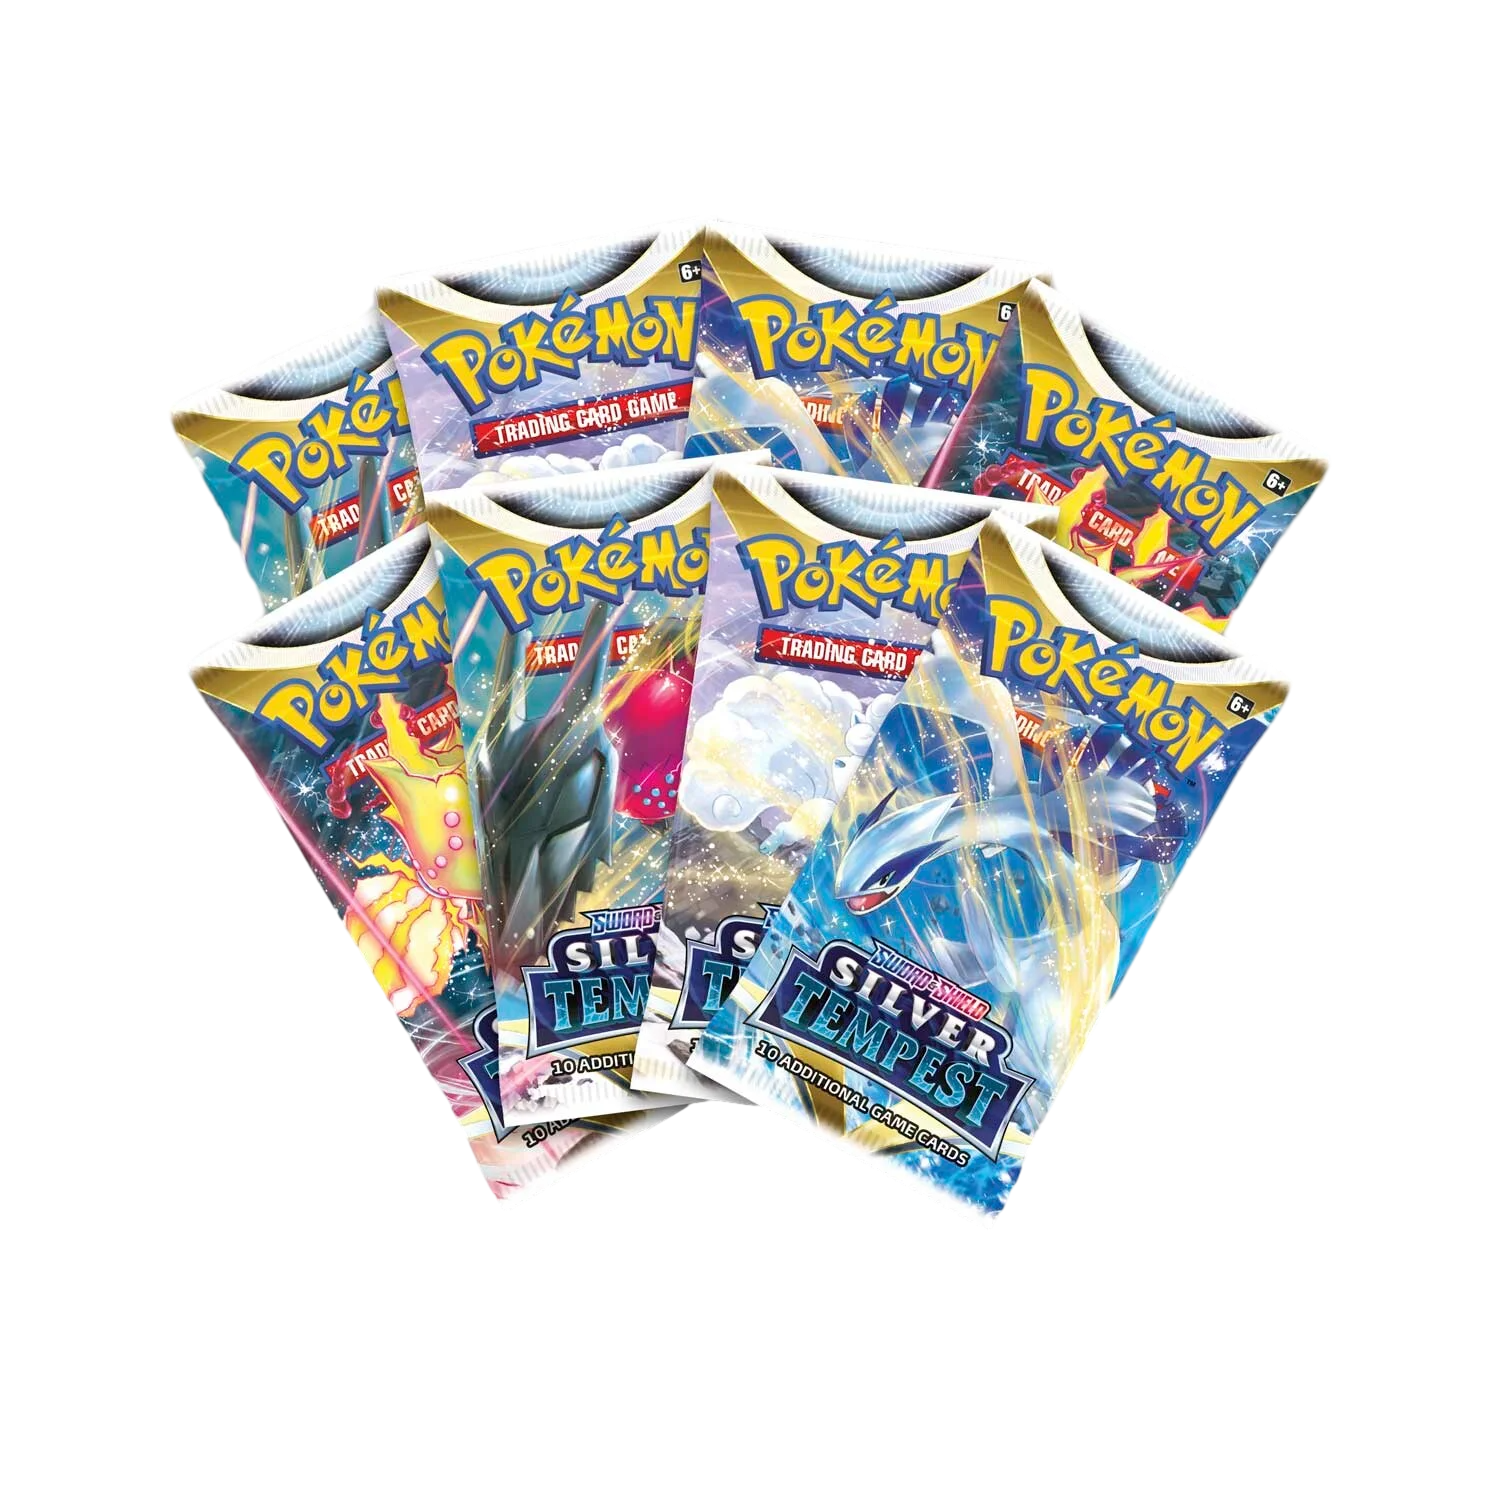 Silver Tempest Booster Packs